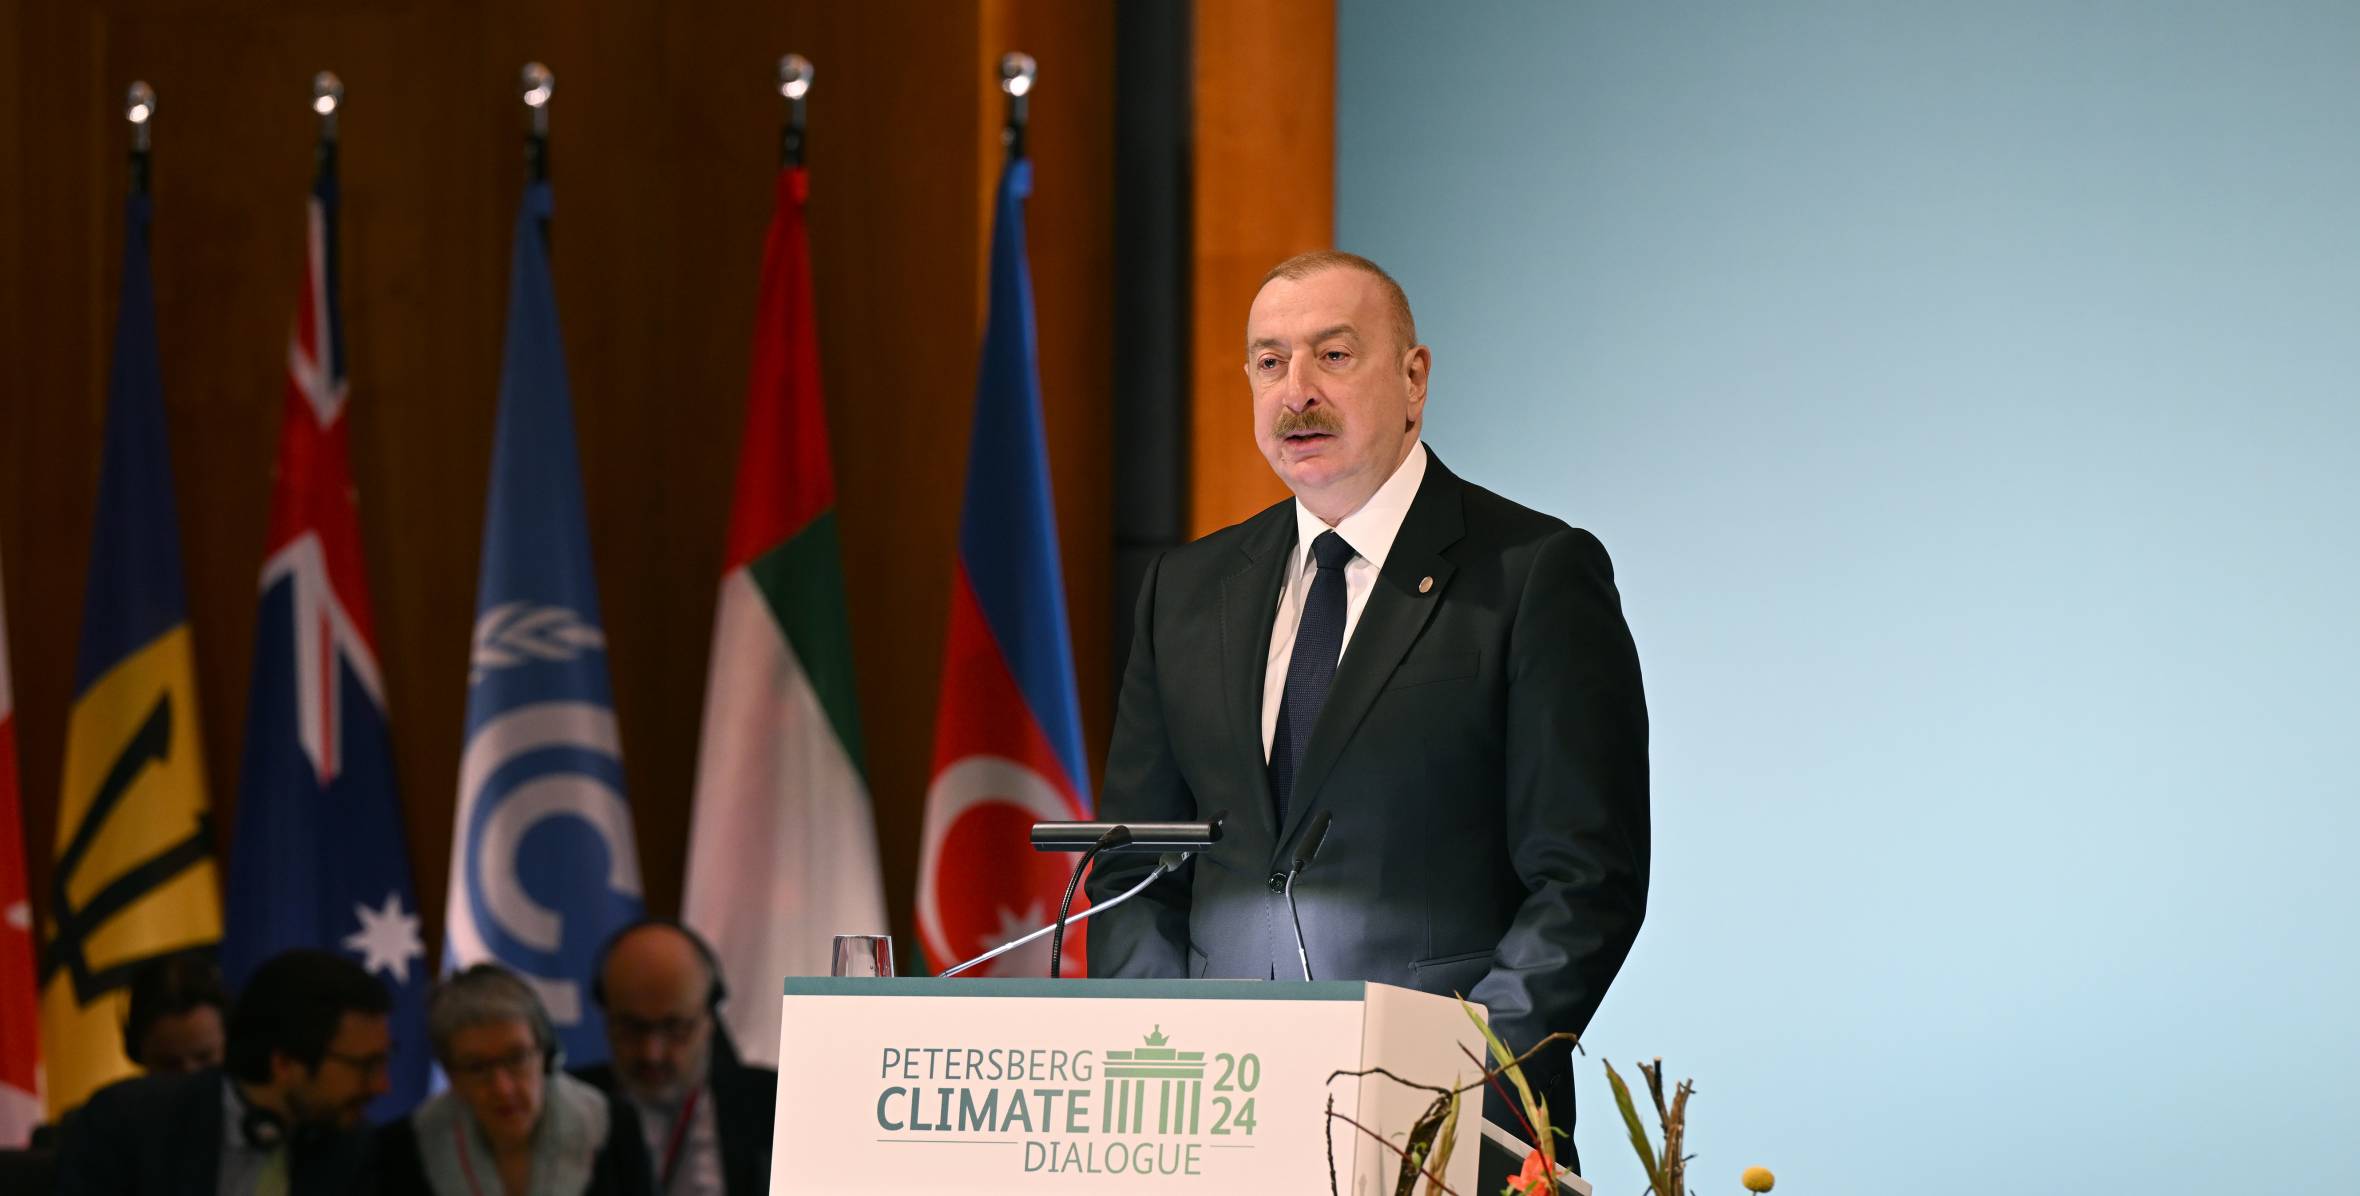 Ilham Aliyev participated in the High Level Segment of the 15th Petersberg Climate Dialogue